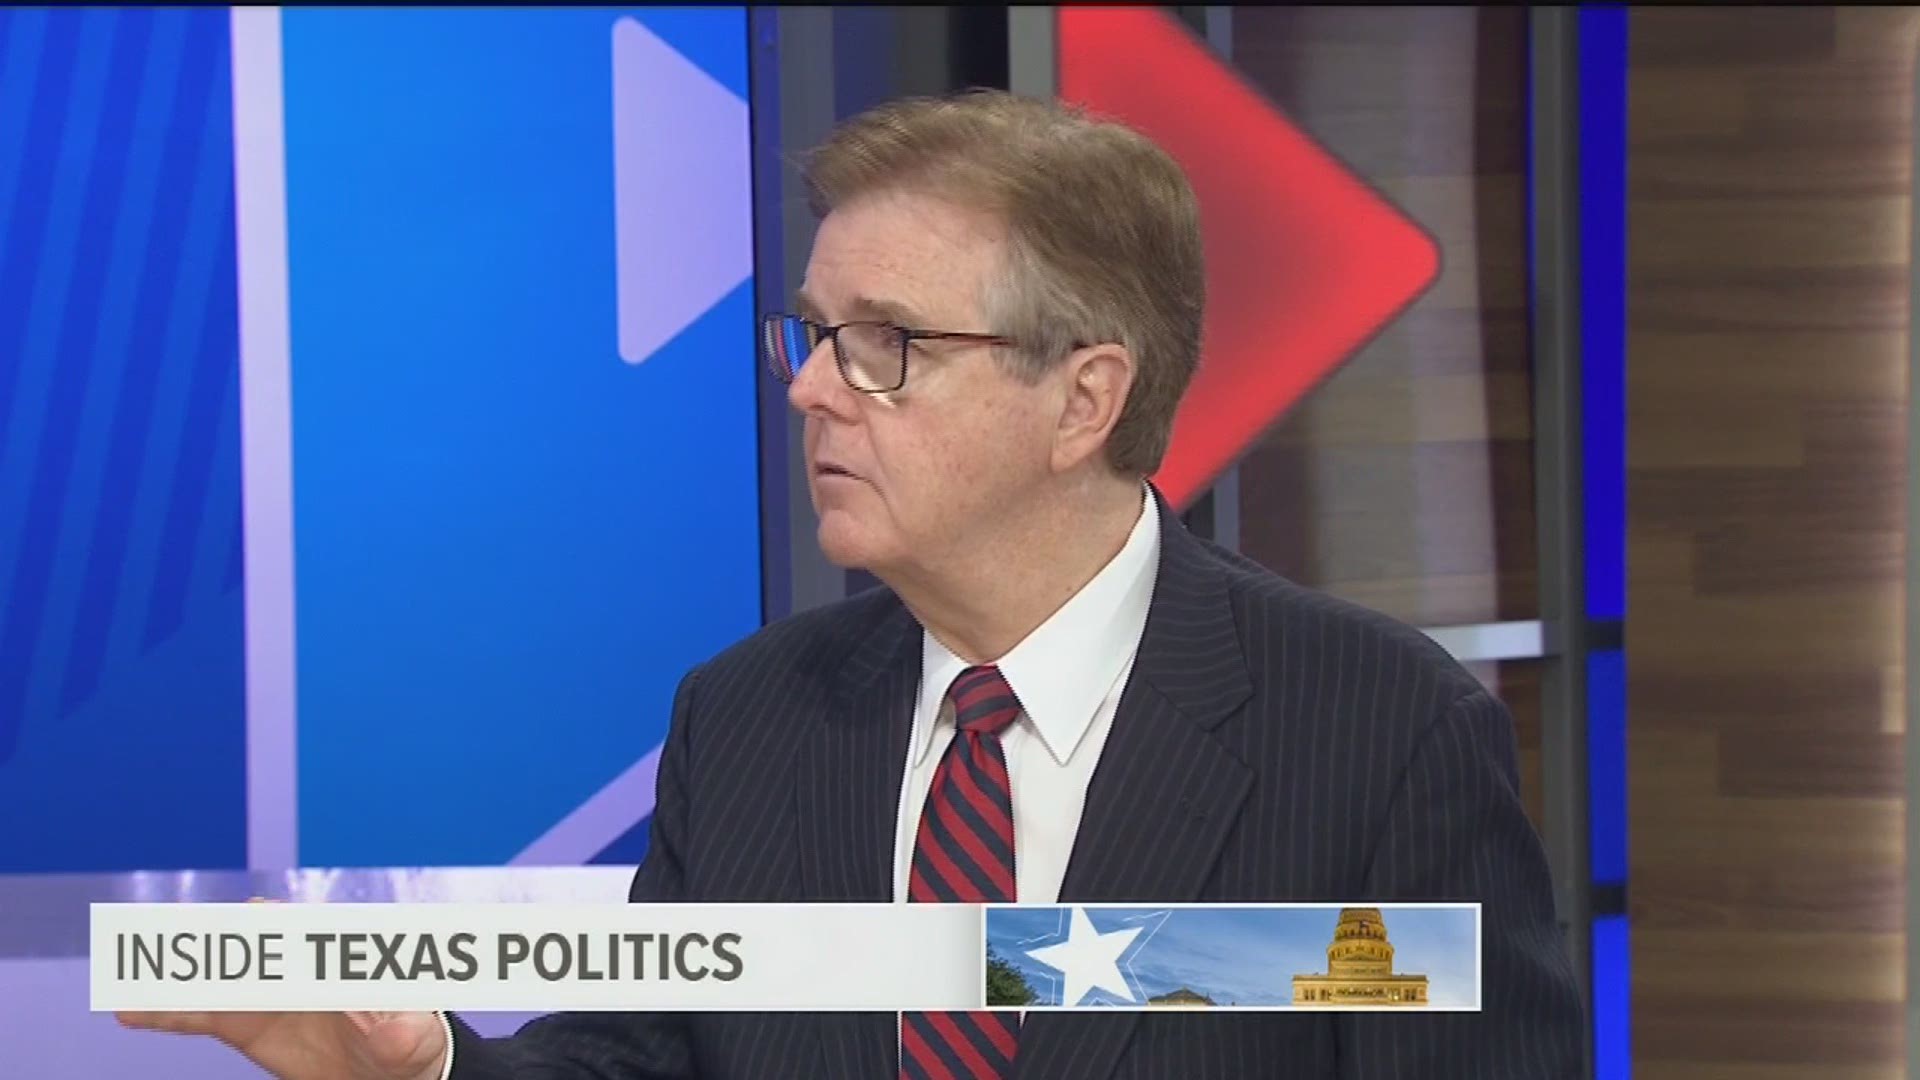 Inside Texas Politics began with Texas Lt. Gov. Dan Patrick. The Republican lieutenant governor joined host Jason Whitely to discuss property taxes and the pushback that Republicans are getting from grassroots conservatives. The Quinnipiac poll released a couple of weeks ago that suggested Texas will be a battleground state next year was also a topic. Patrick offered perspective on whether Republicans are in trouble and could lose Texas.